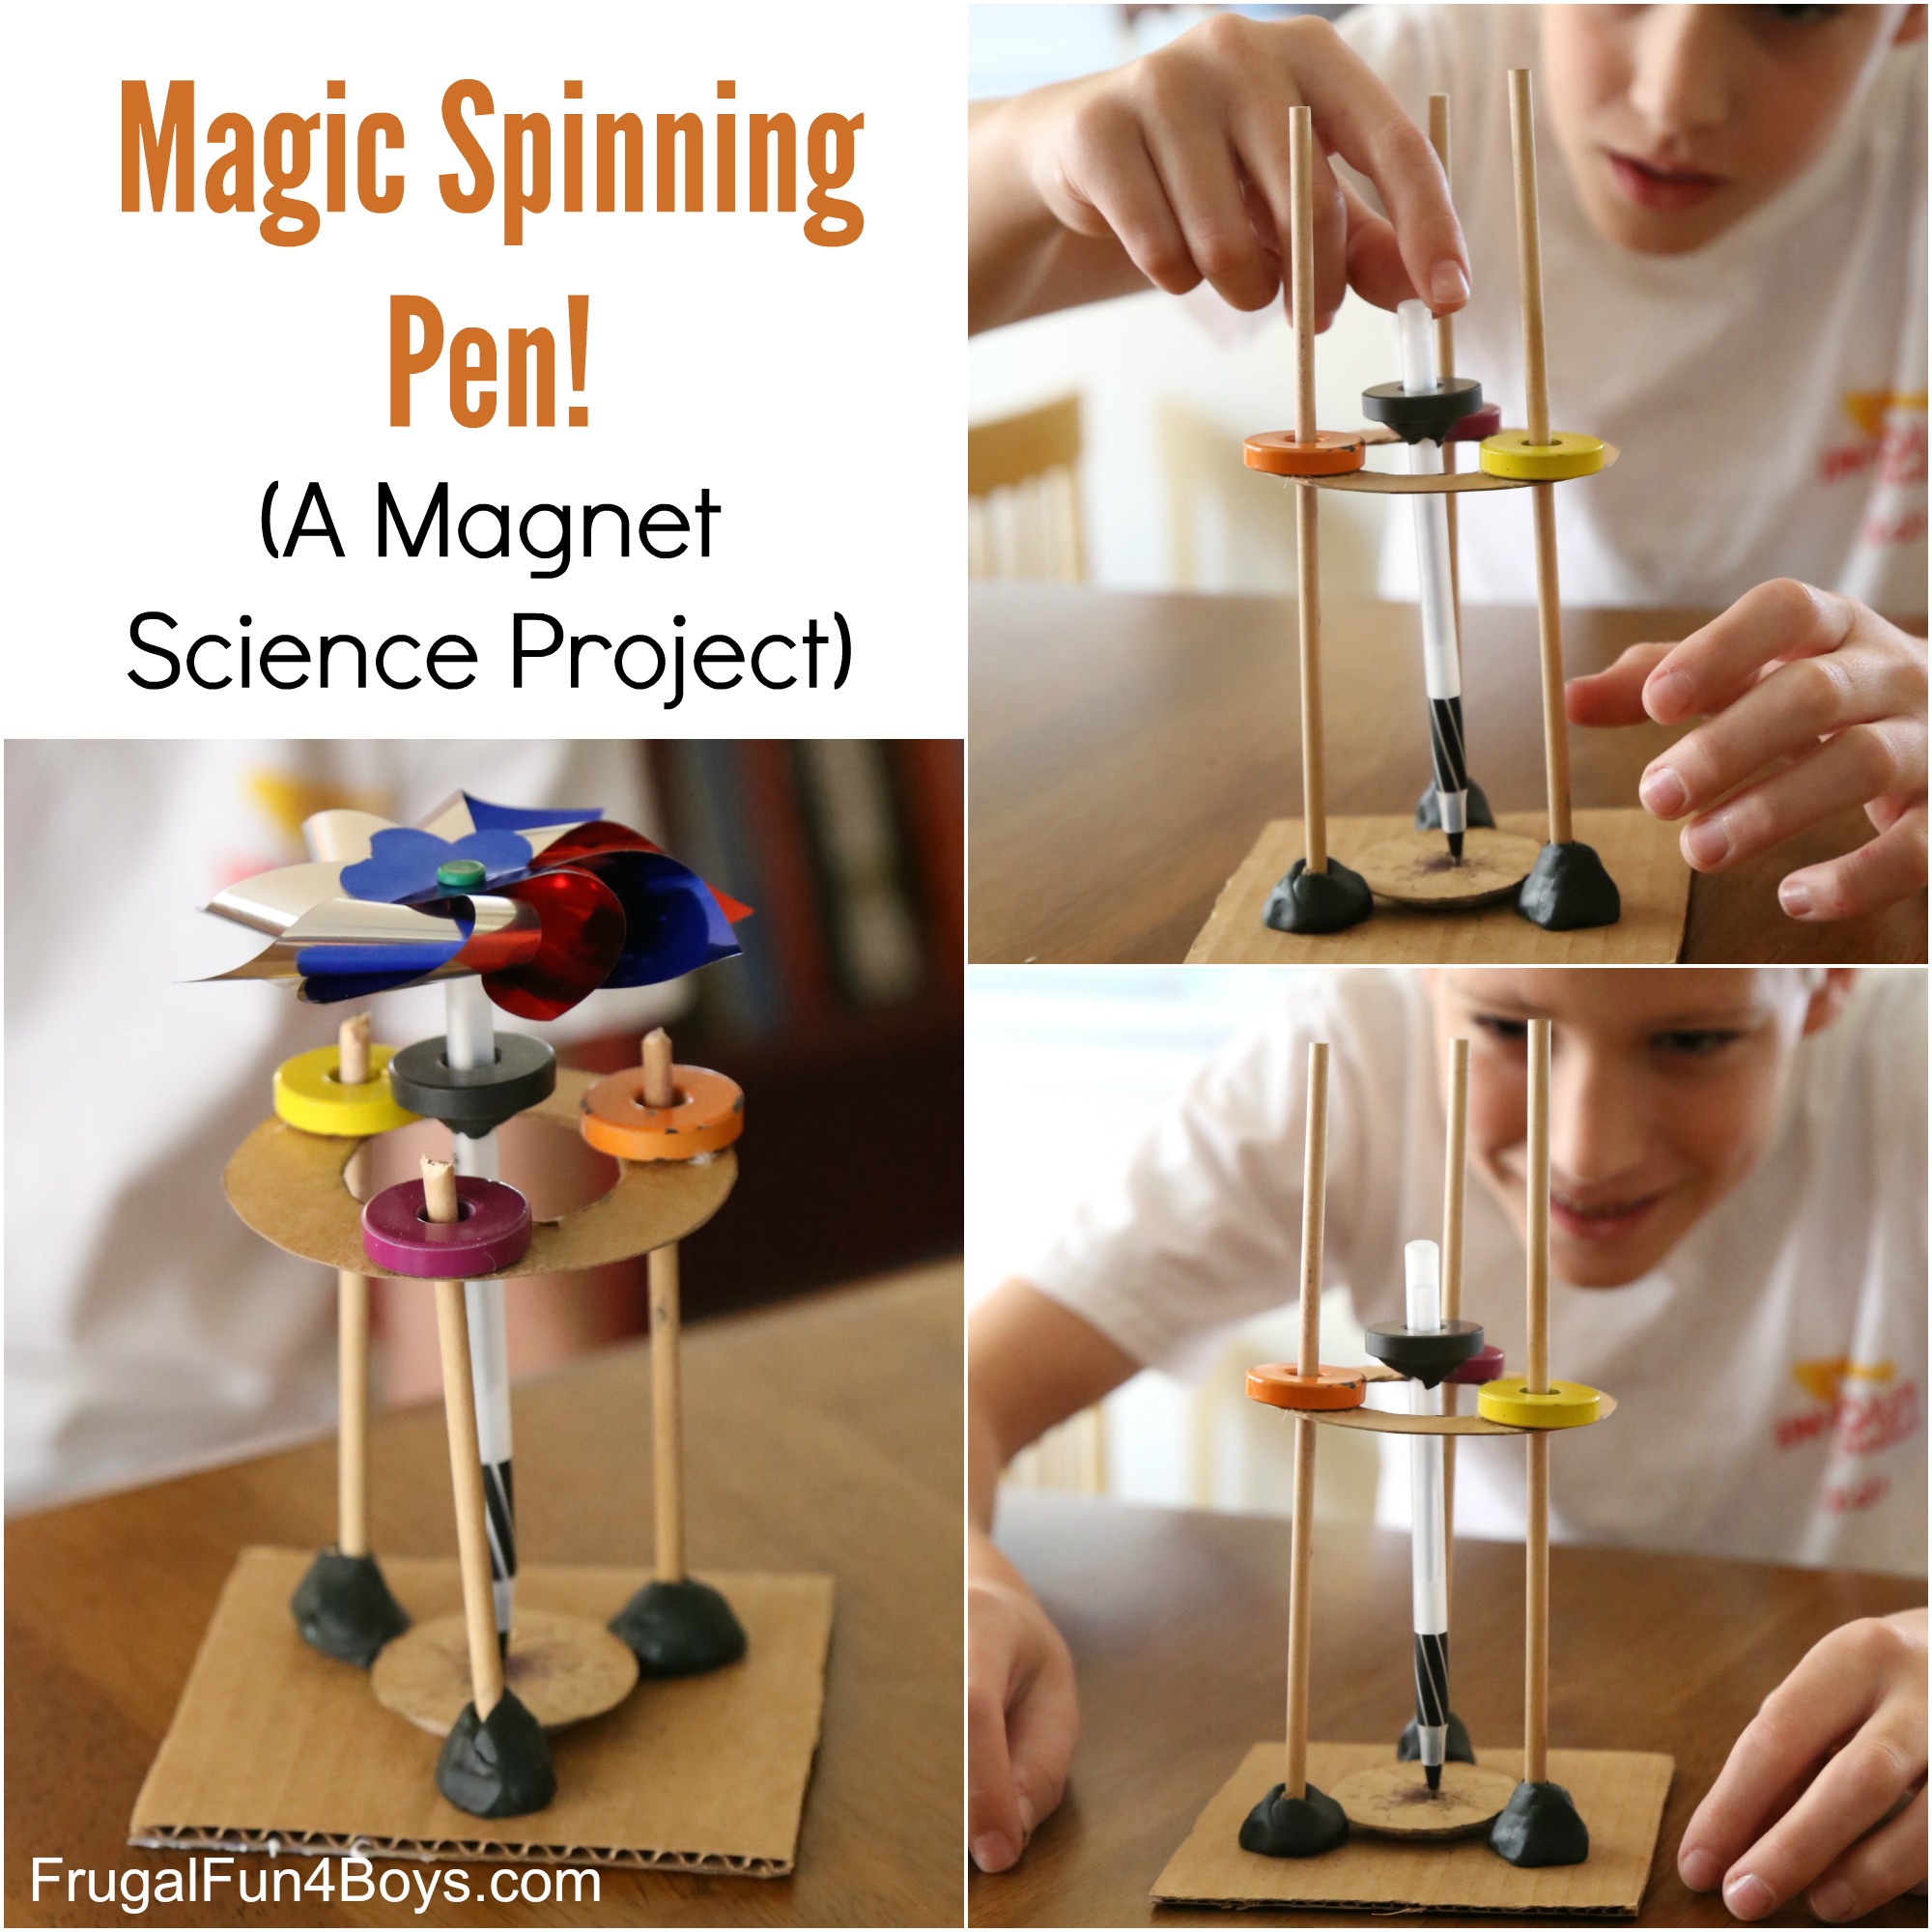 Magic Spinning Pen! A Magnet Science Experiment for Kids